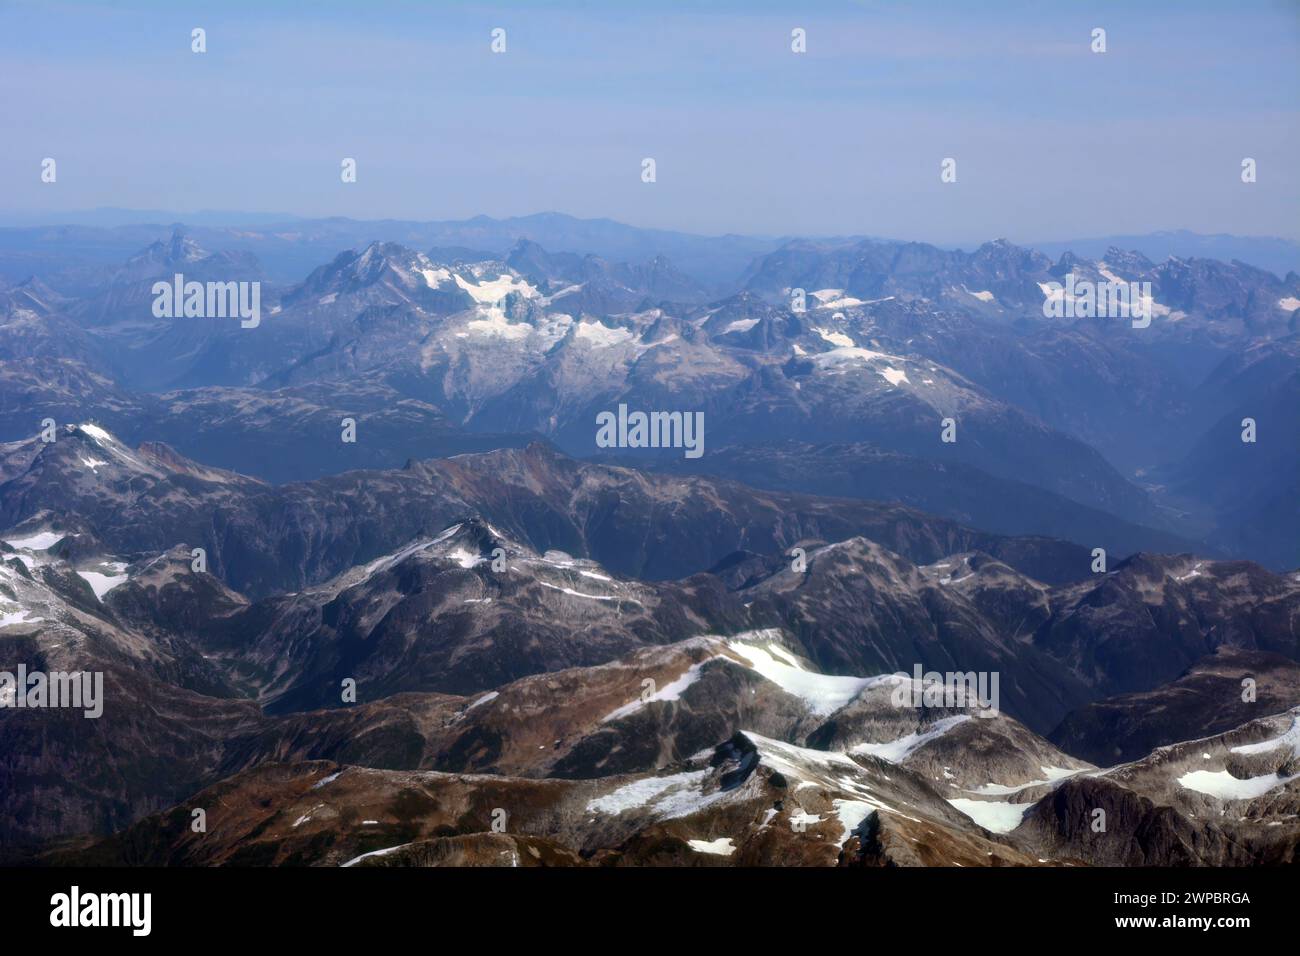 Aerial view of British Columbia's Coast Mountains at the end of summer showing glacial melt and retreat, near Bella Coola, British Columbia, Canada. Stock Photo